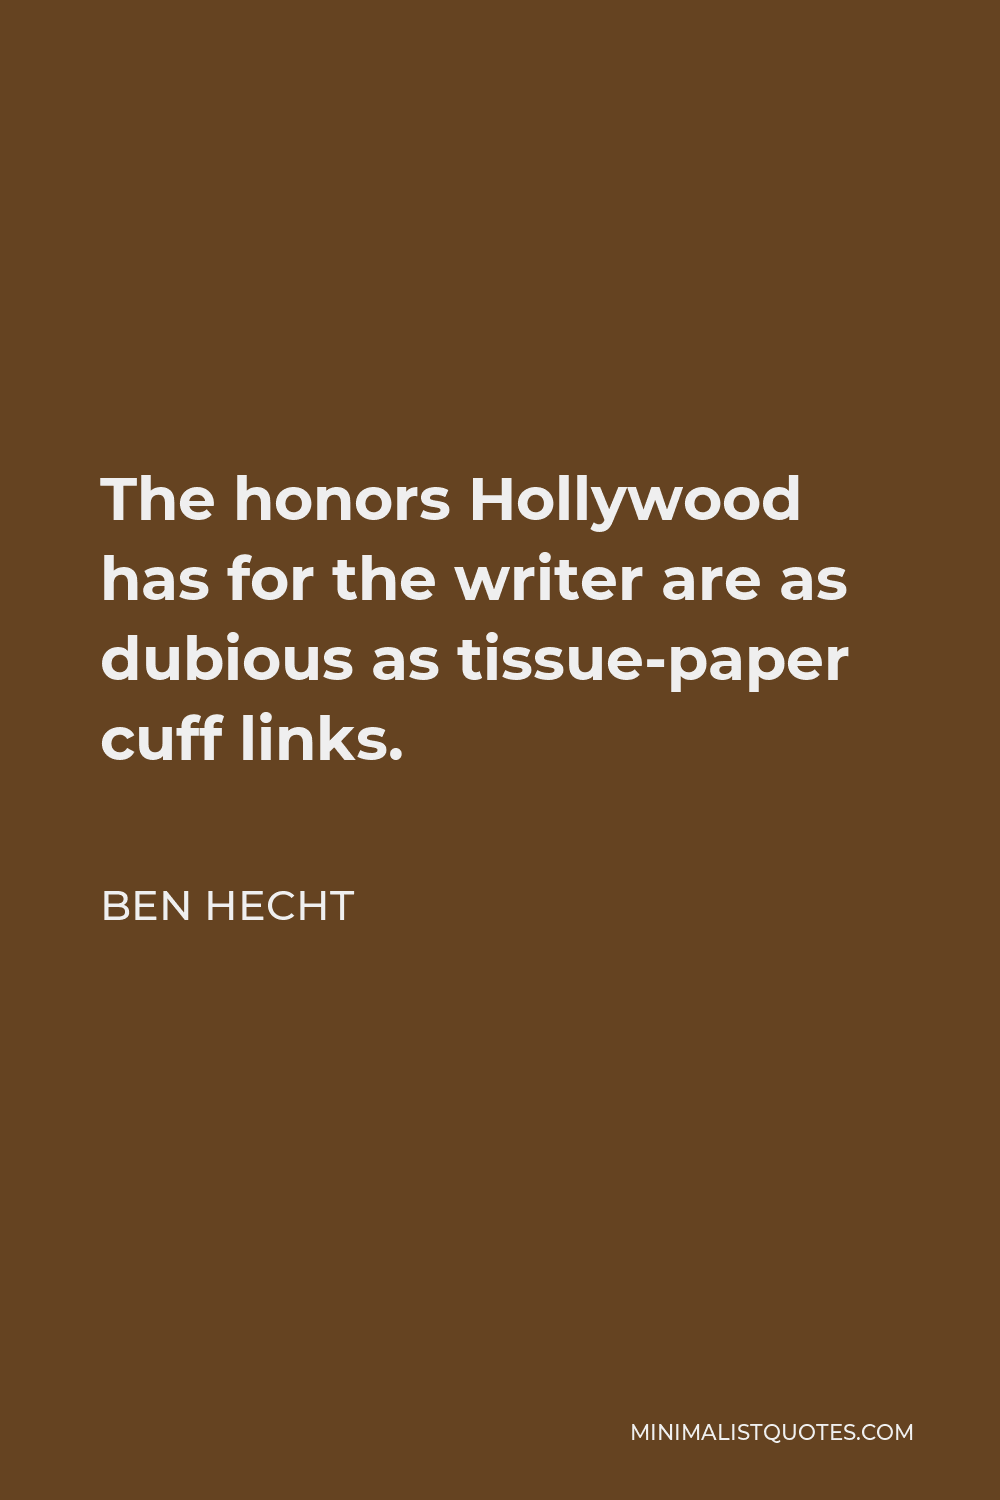 Ben Hecht Quote - The honors Hollywood has for the writer are as dubious as tissue-paper cuff links.